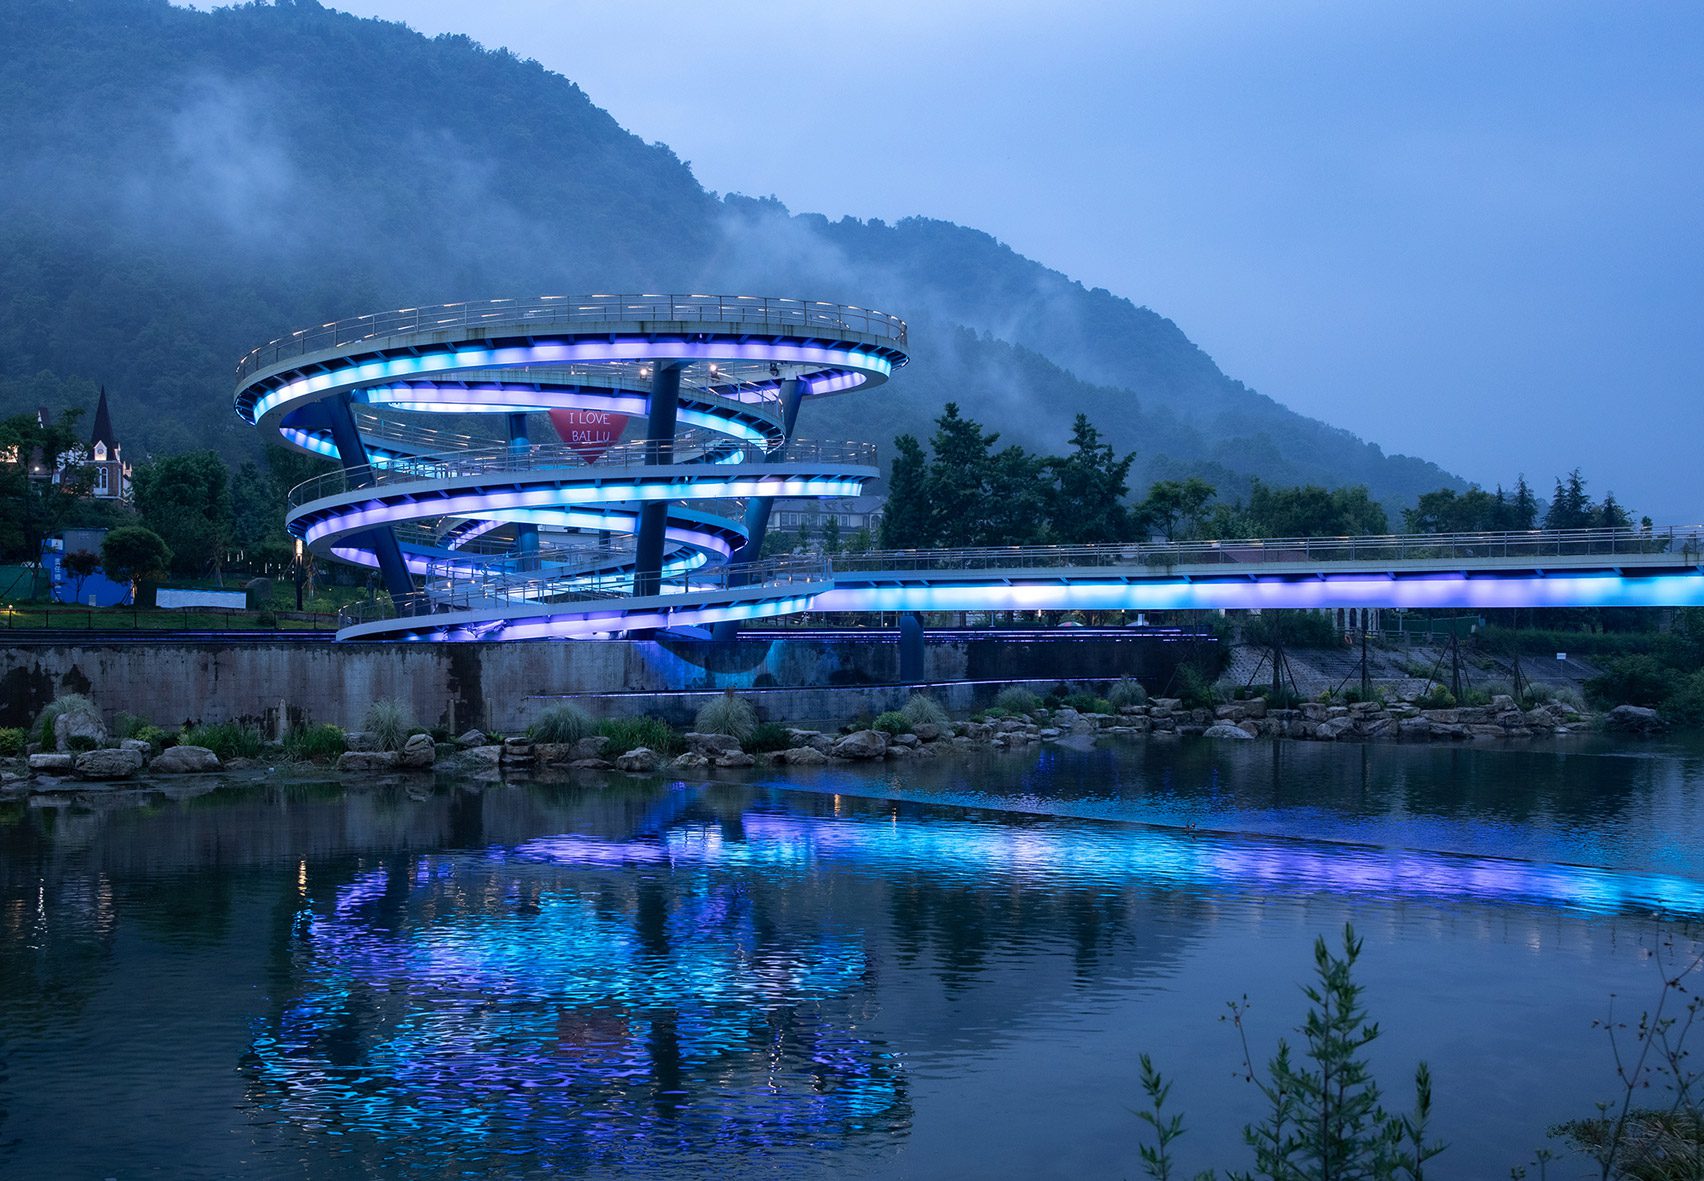 Spiralling viewpoint in China